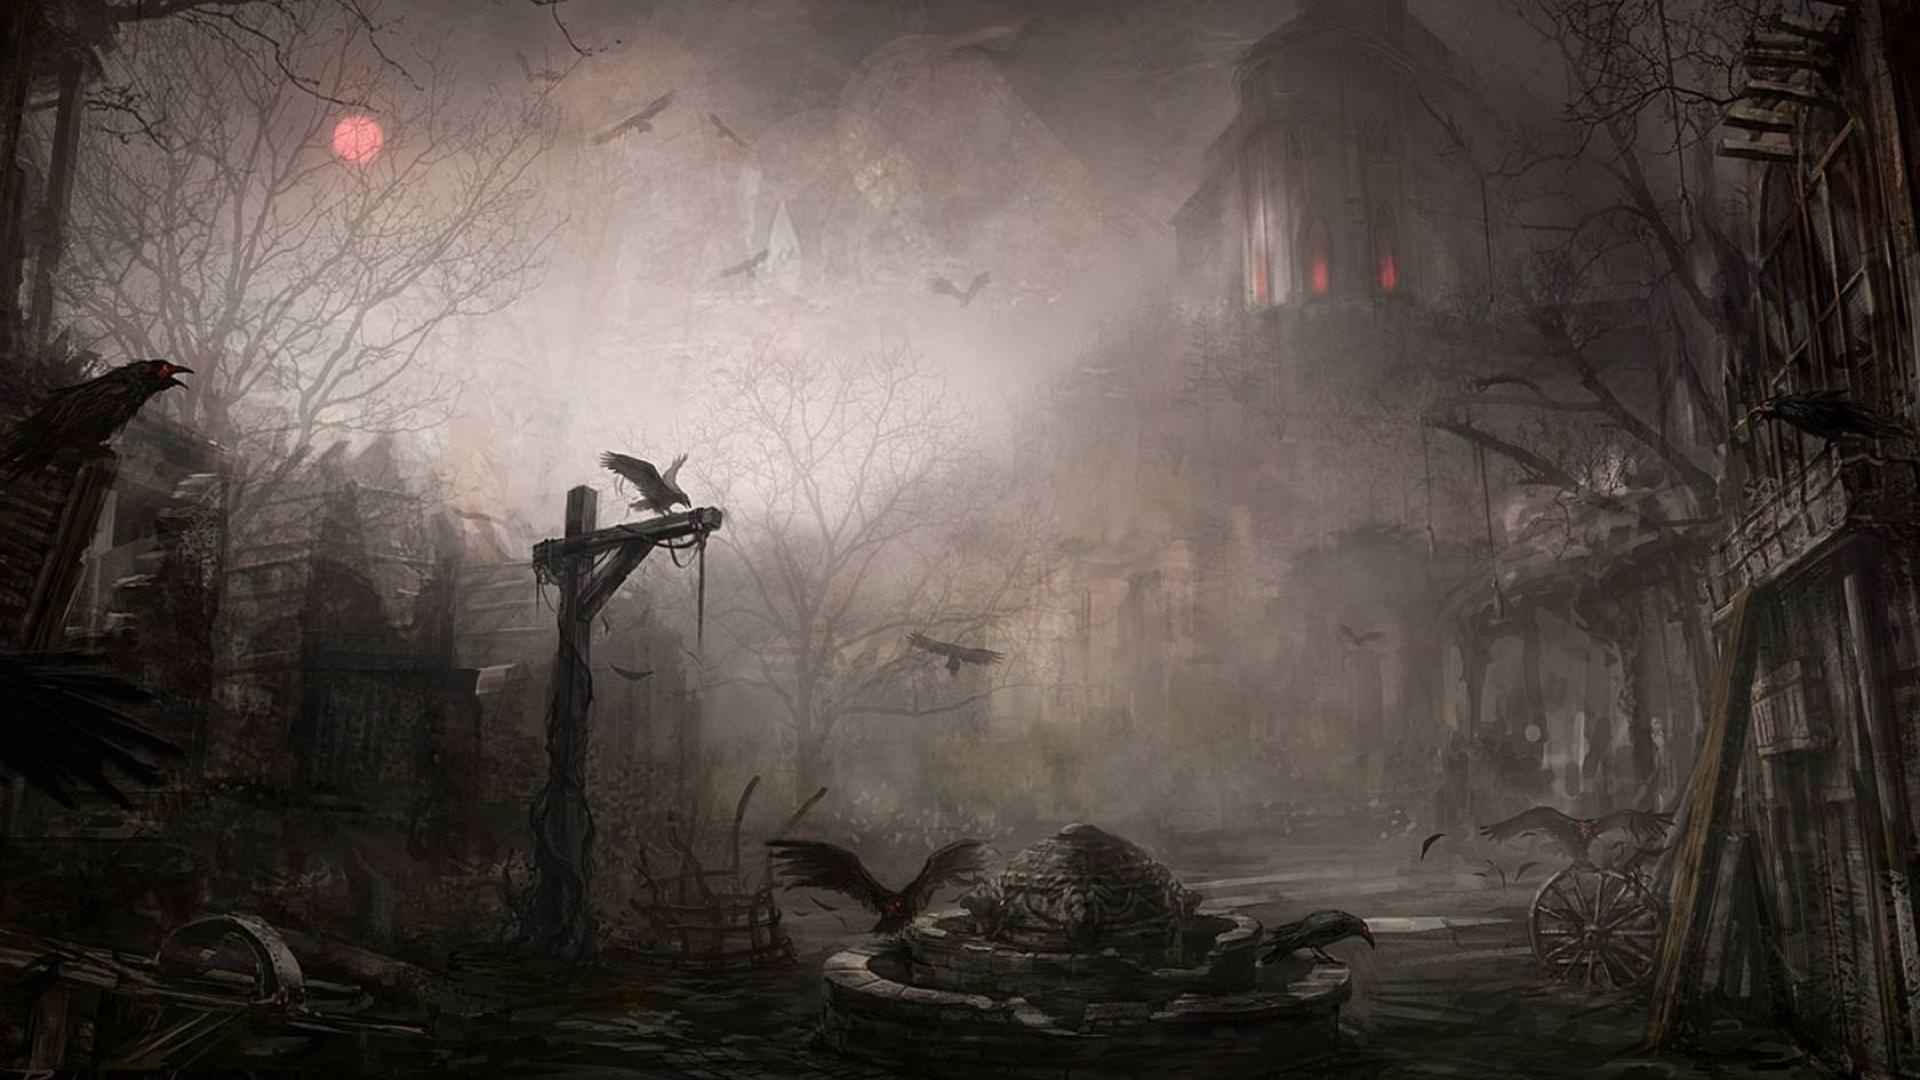 Dark Village Gothic Ghost 1920x1080 HD And FREE Stock Wallpaper